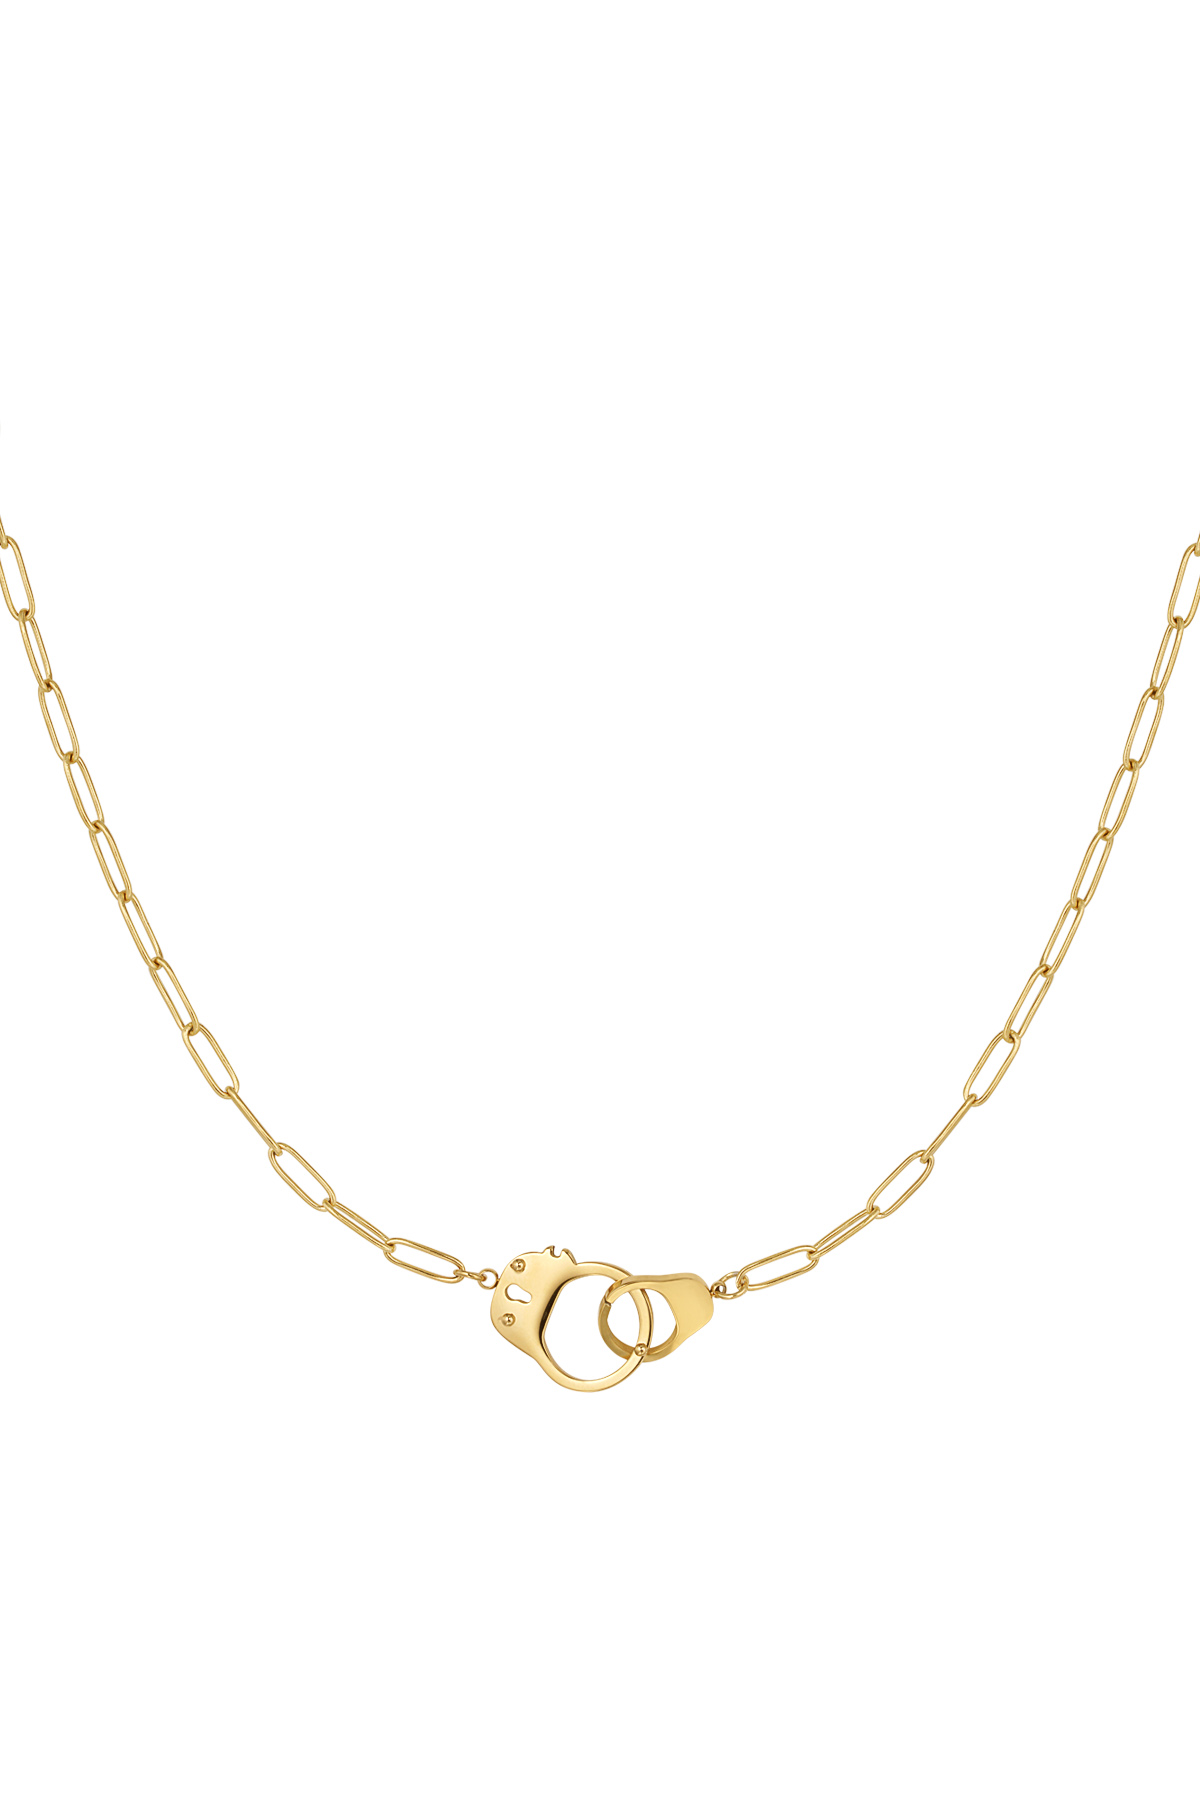 Link chain connected charm - gold